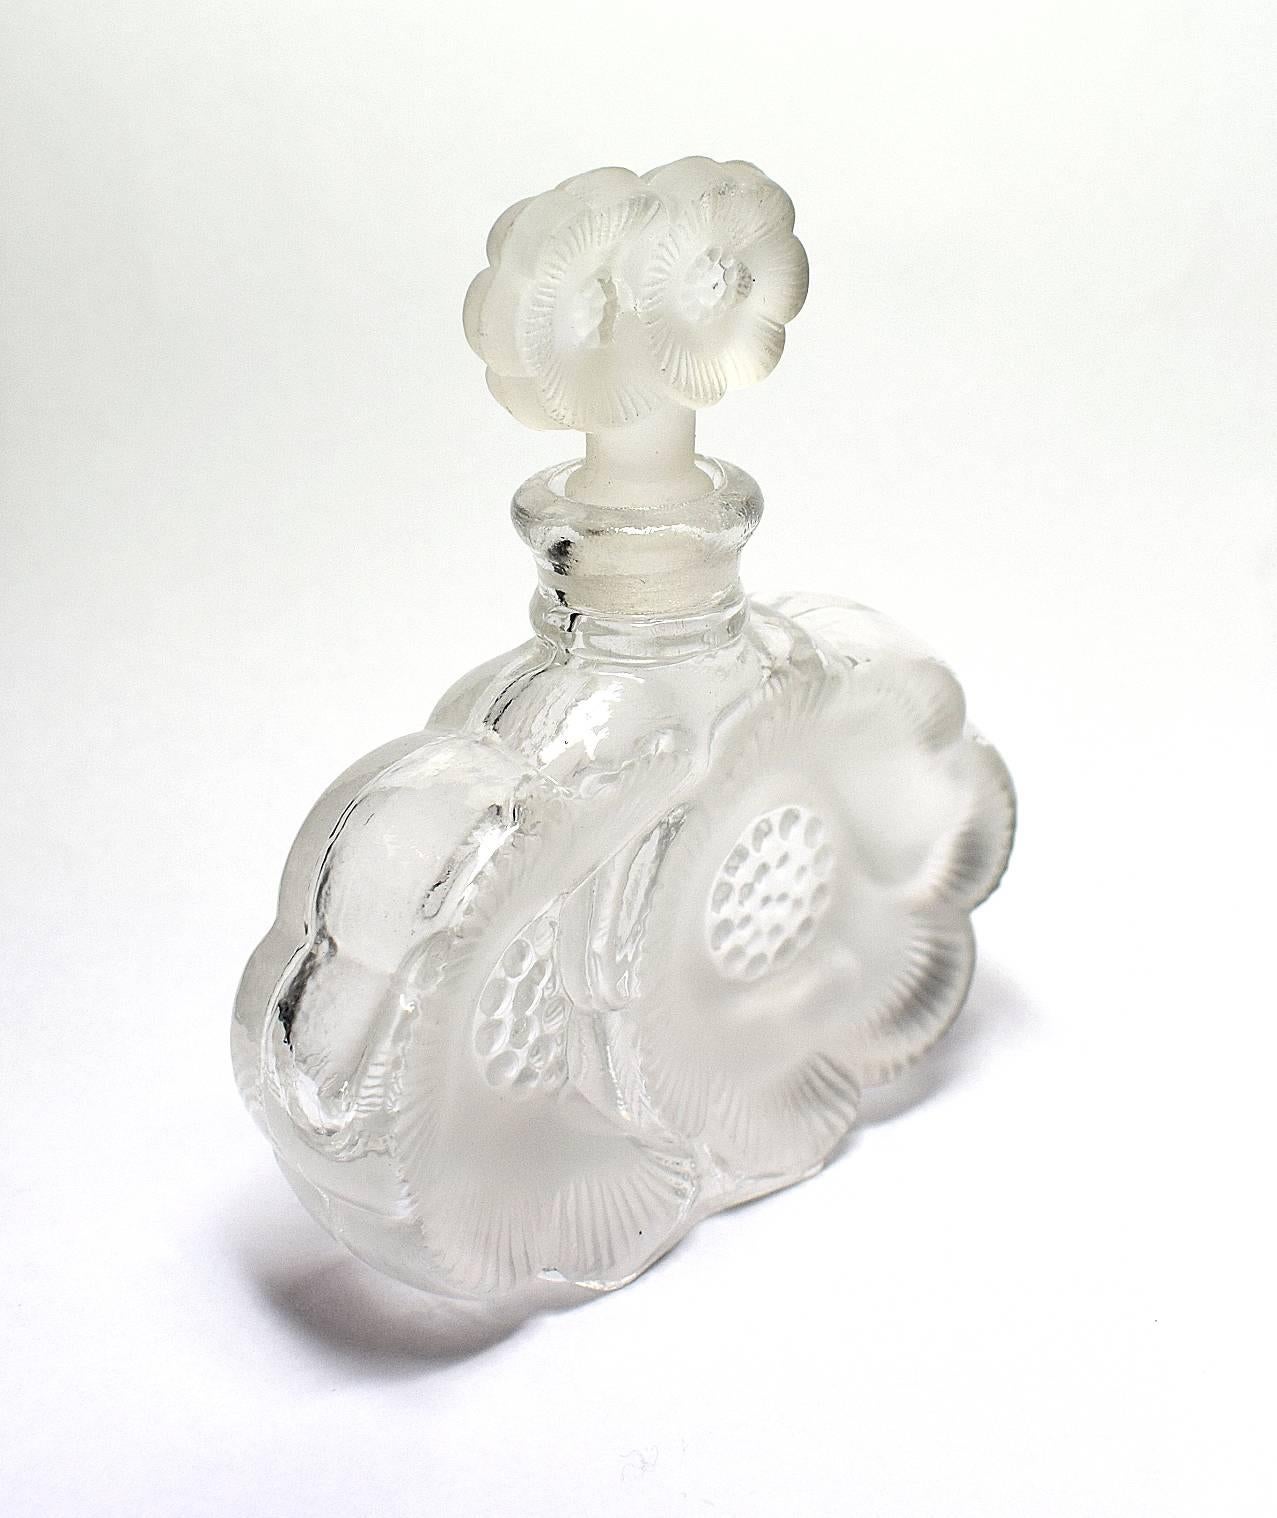 A beautiful clear and frosted glass 1930s scent bottle which has a wonderful embossed floral shape. Overall condition is excellent, very minor signs of age with no damage anywhere. These bottles look great with perfume in or with colored water in